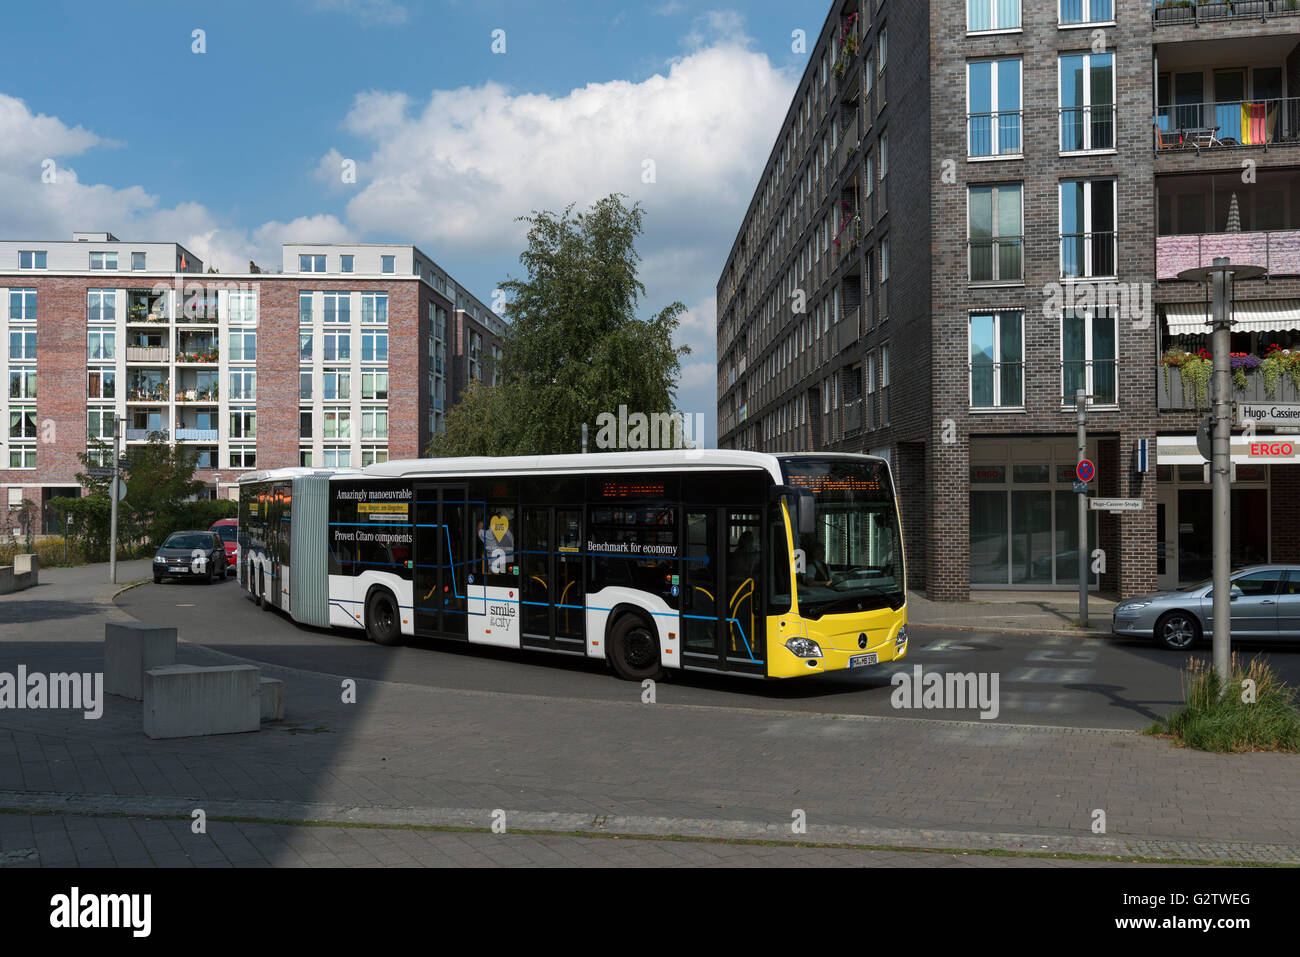 04.09.2015, Berlin, Berlin, Germany - Berlin-Spandau, Hugo-Cassirer-Strasse, Berlin Transport Authority (BVG), bus line 236, BVG is testing extra long buses, Giant articulated Mercedes-Benz CapaCity L, length 21 meters, indicator: MA-MB 190, with bend protection ATC ( Articulated Turntable controller), a guided fourth axis ensures with electronic regulation called ASA (Additional Steering axle) the maneuverability of the metropolitan area bus. EBS150904D718CAROEX.JPG - NOT for SALE in G E R M A N Y, A U S T R I A, S W I T Z E R L A N D [MODEL RELEASE: NO, PROPERTY RELEASE: NO, (c) caro photo a Stock Photo